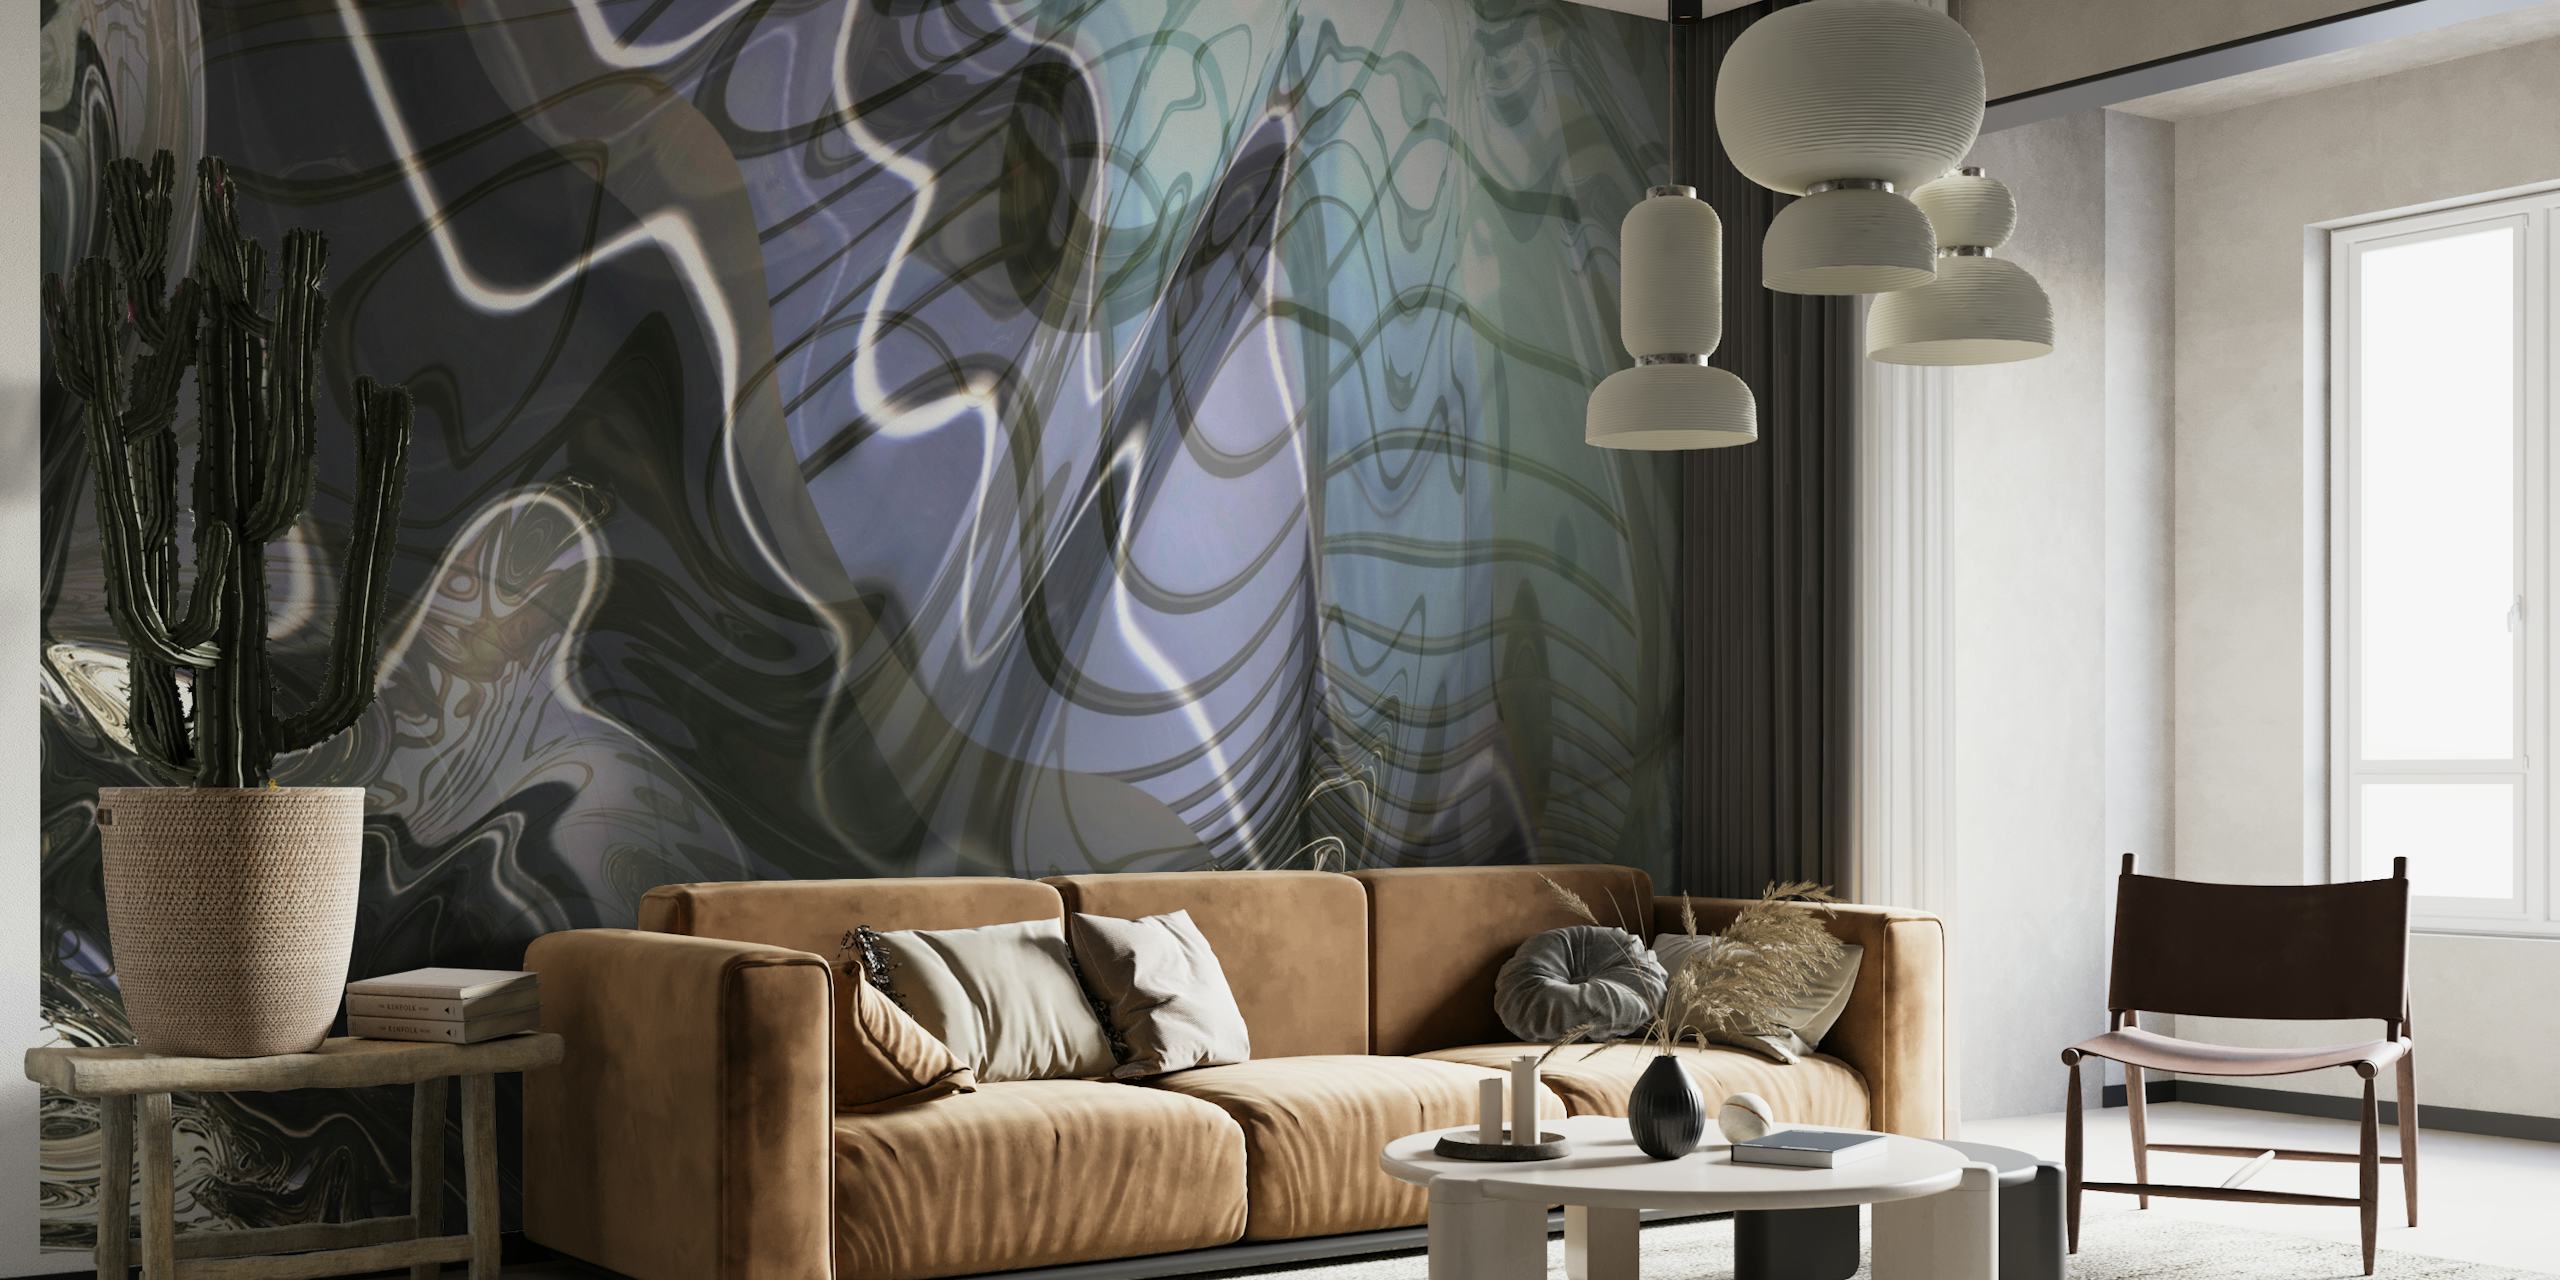 Abstract wall mural 'Turbulence 11' with swirls of blue and gray depicting dynamic movement.